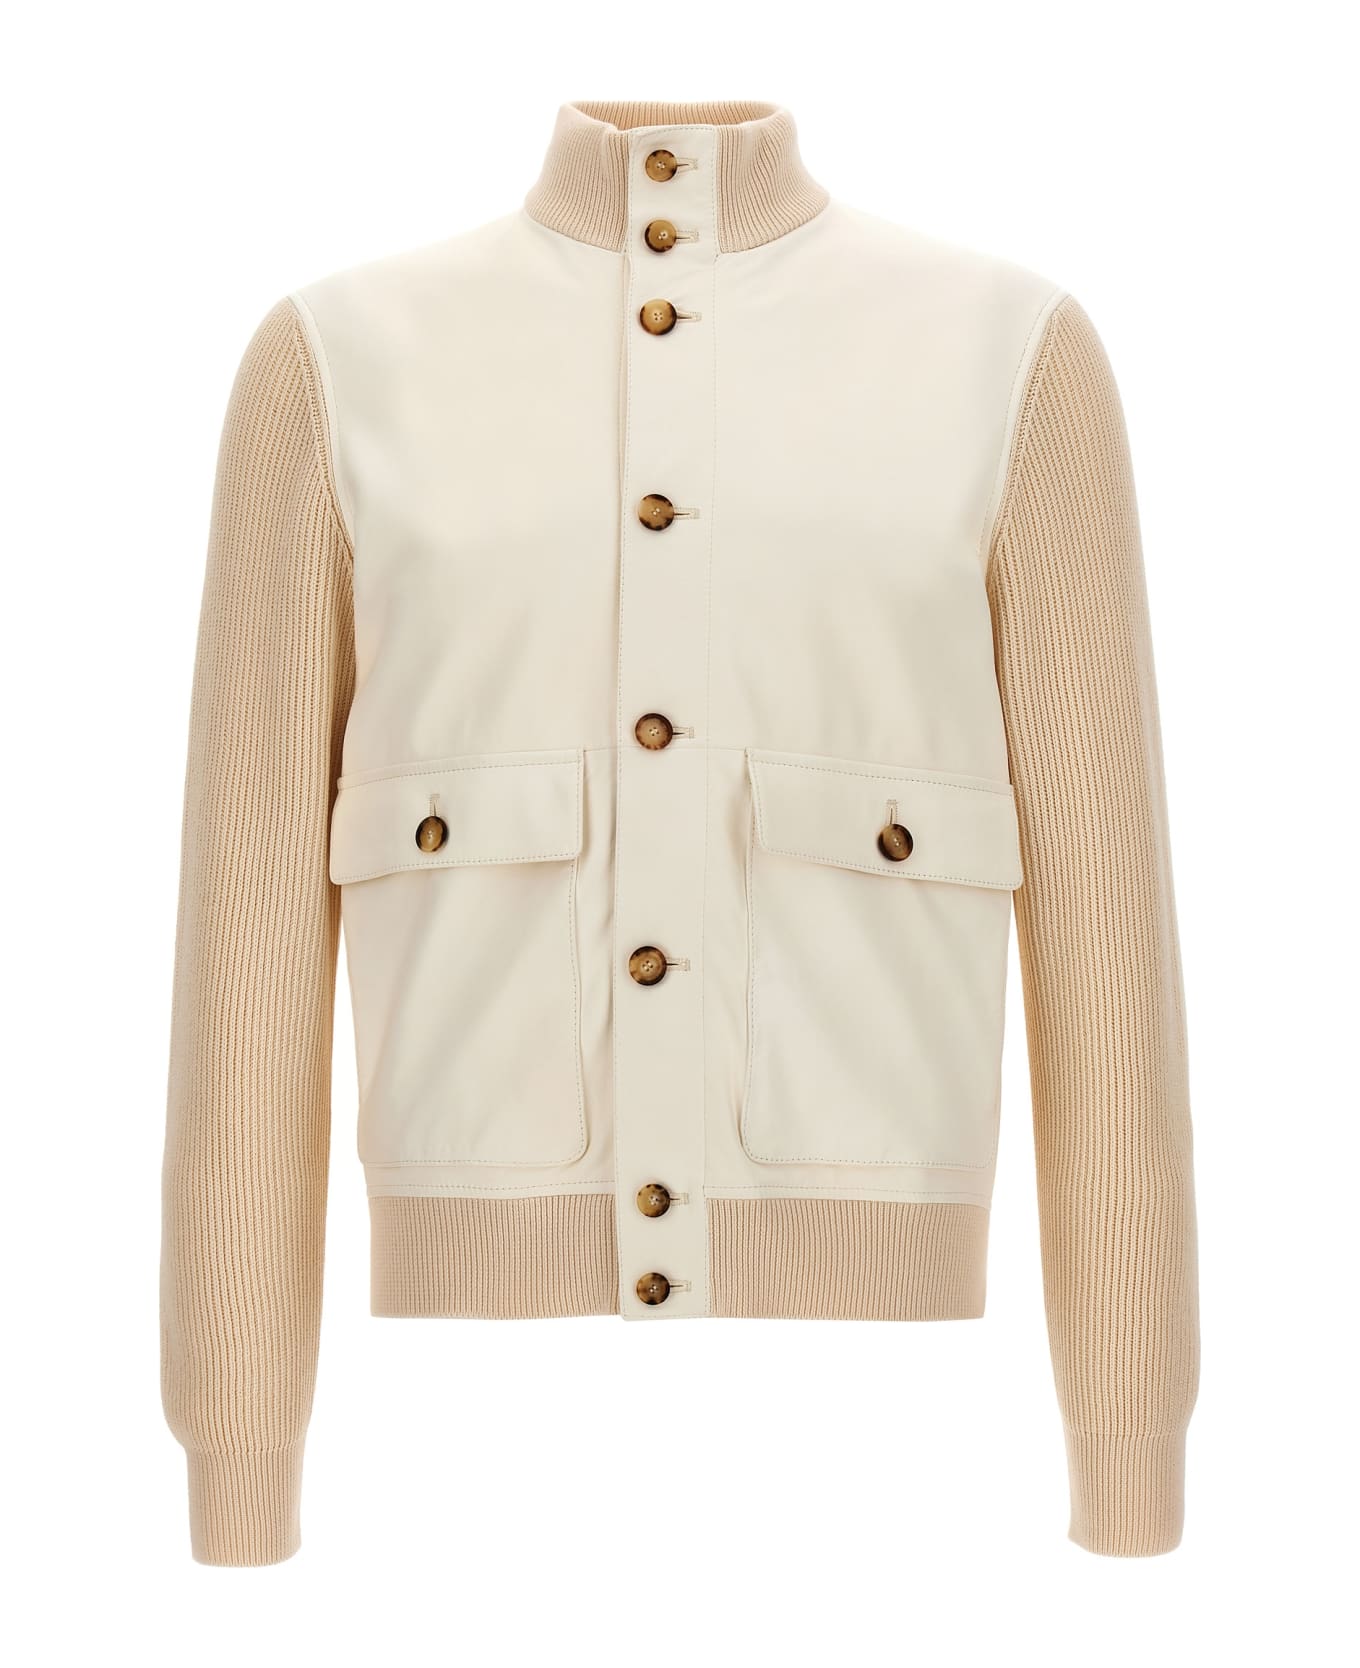 Brunello Cucinelli Leather Jacket With Knit Inserts - Beige